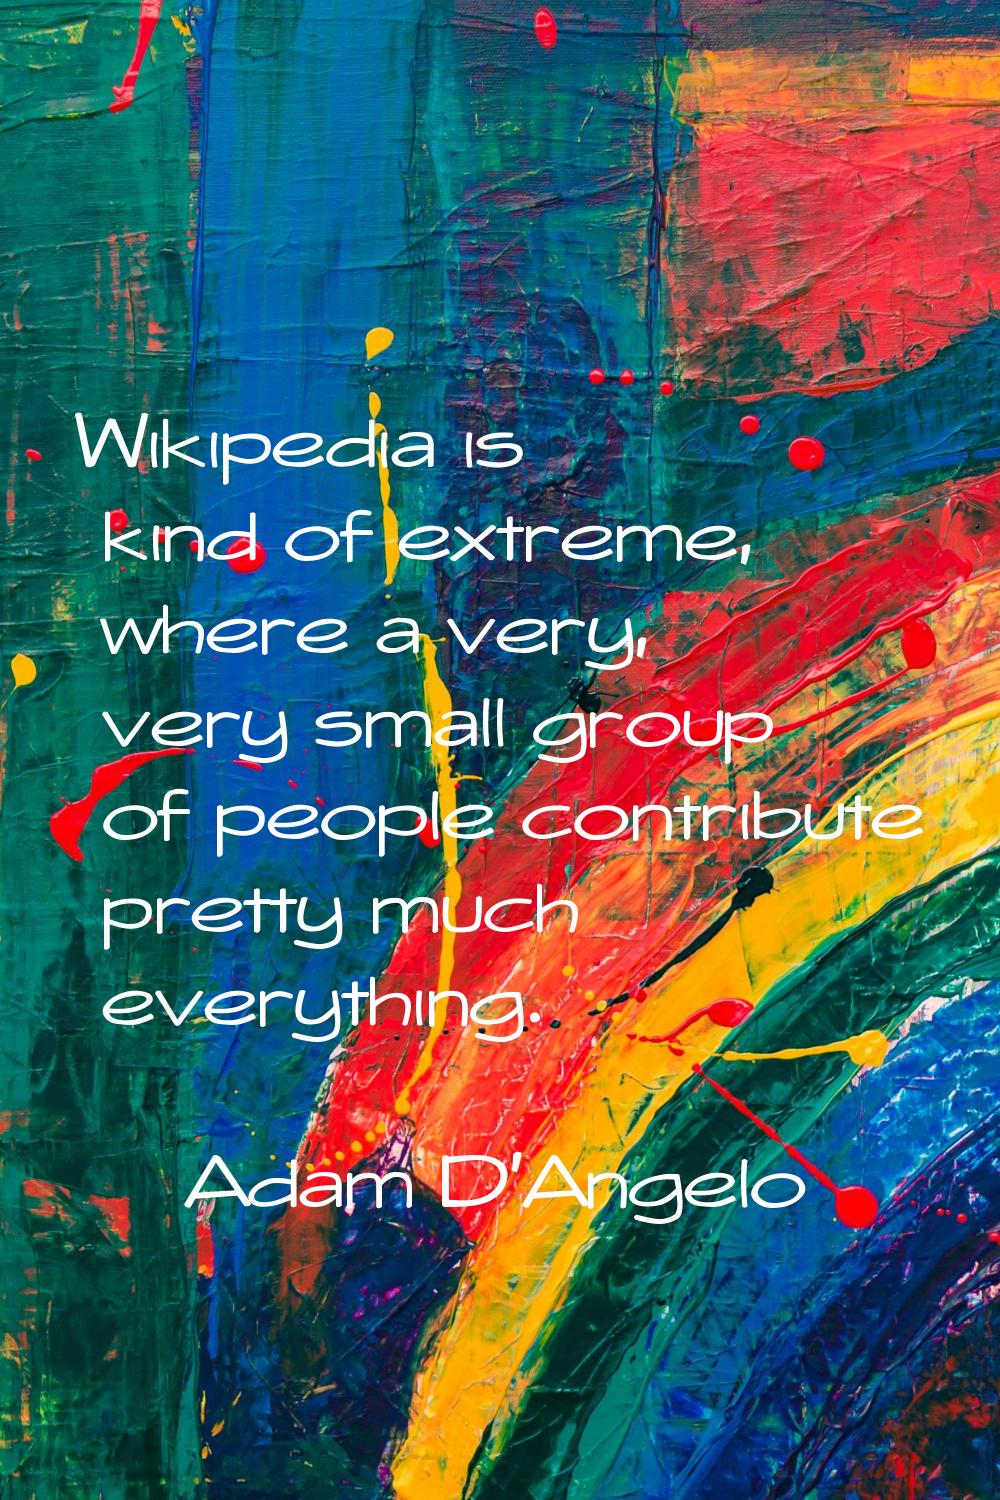 Wikipedia is kind of extreme, where a very, very small group of people contribute pretty much every